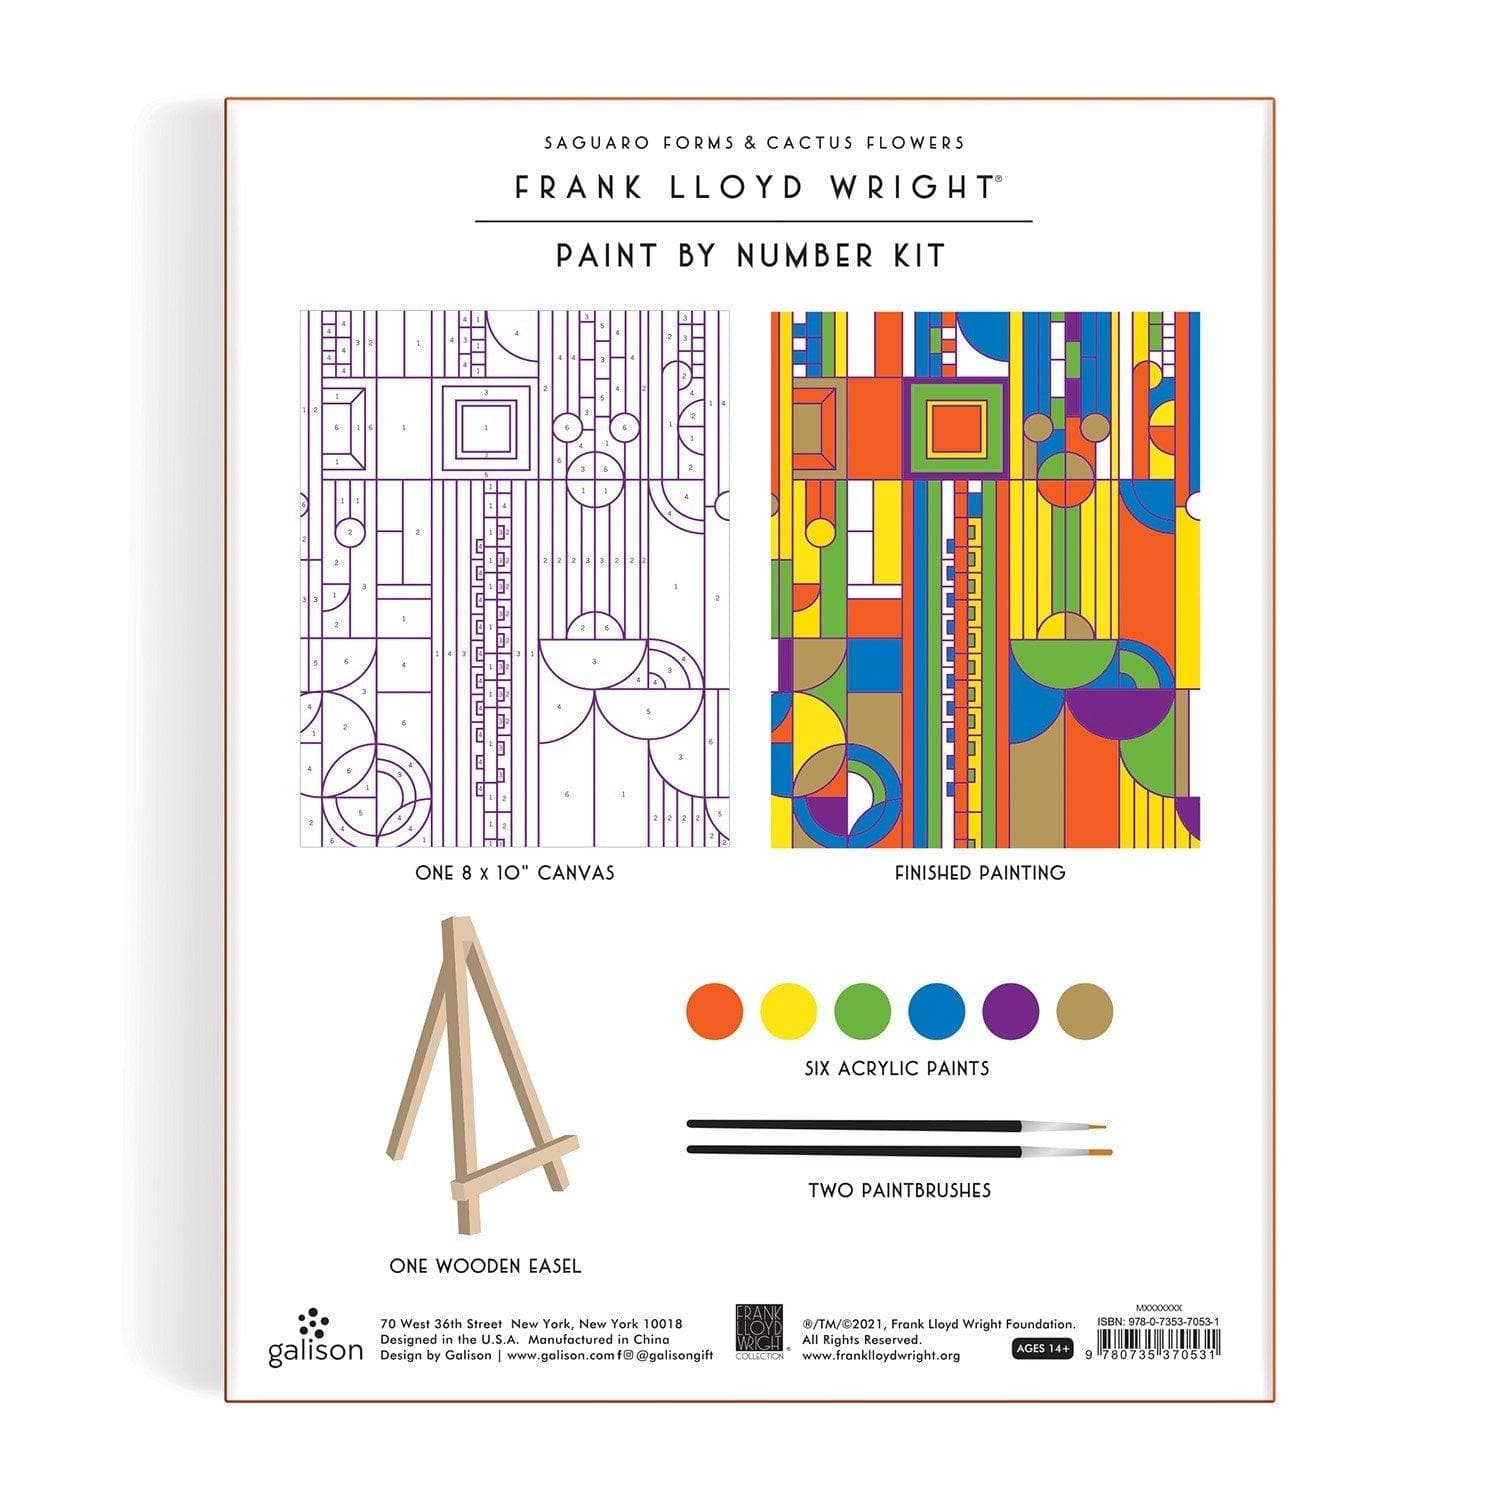 Frank Lloyd Wright Saguaro Cactus and Forms Paint By Number Kit Frank Lloyd Wright Saguaro Cactus and Forms Paint By Number Kit 